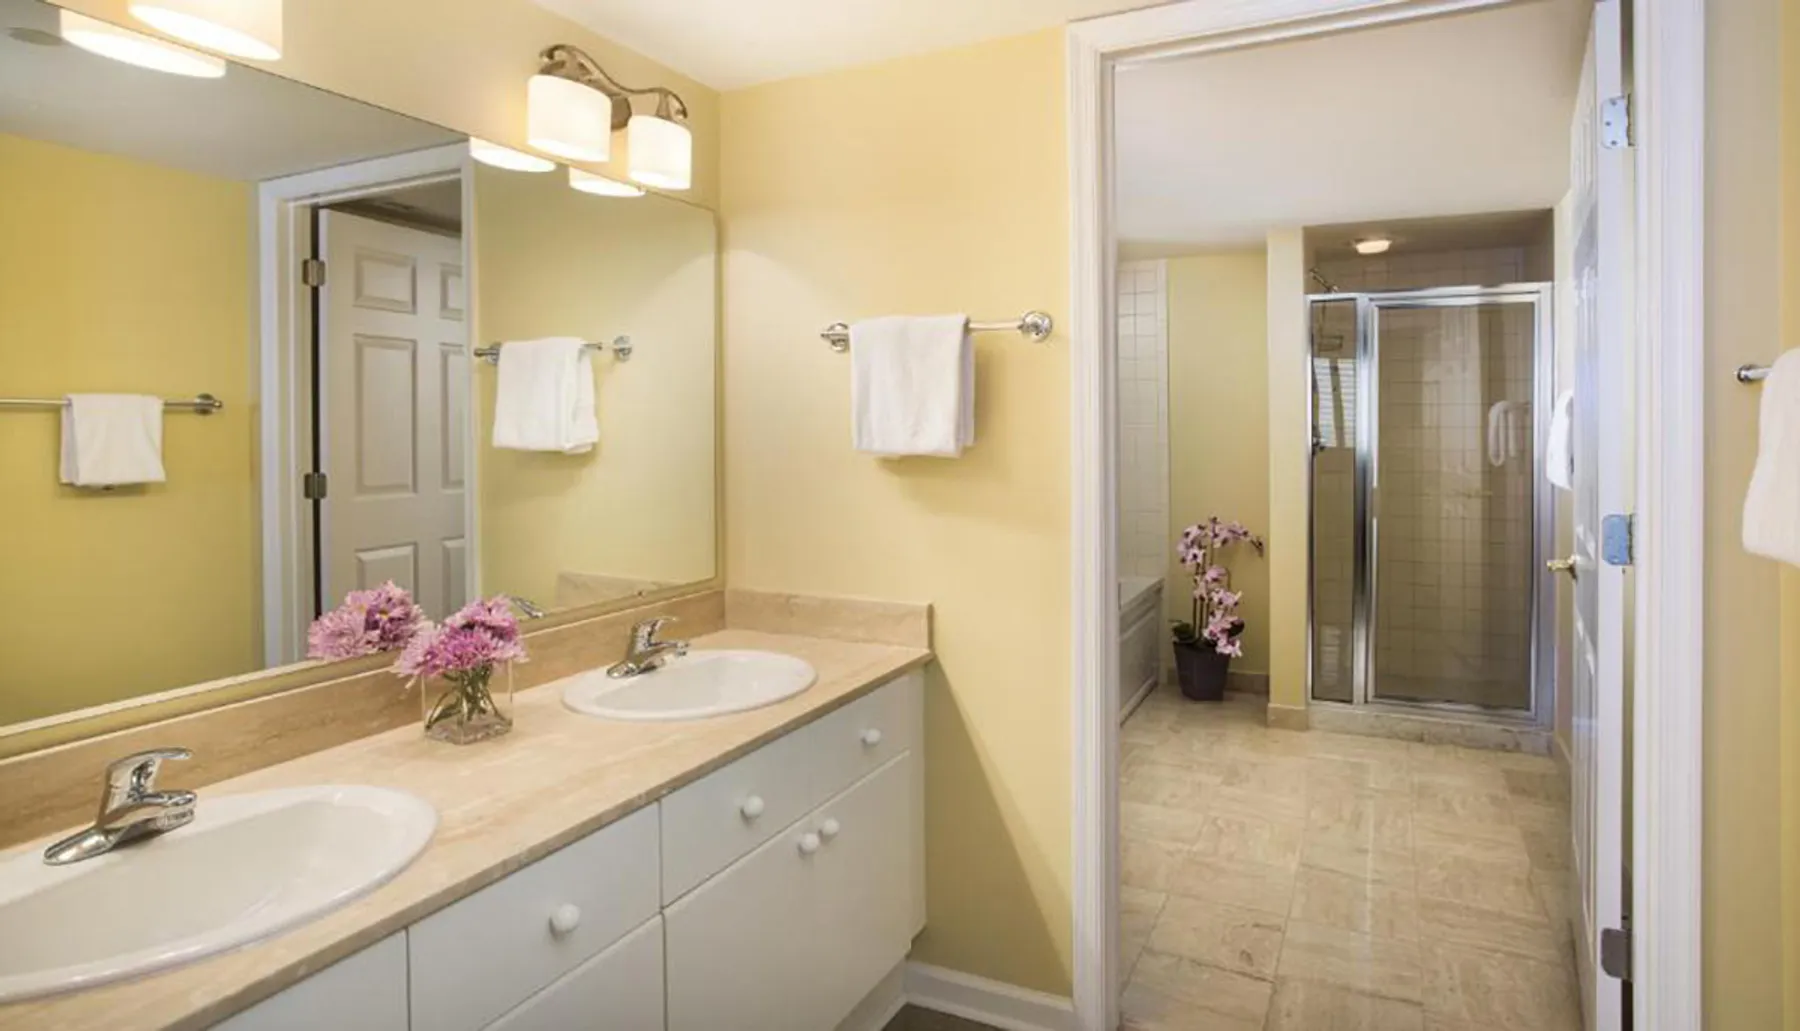 This image shows a tidy, yellow-painted bathroom with a double sink vanity, a large mirror with an overhead light fixture, and a walk-in shower visible through the open door.